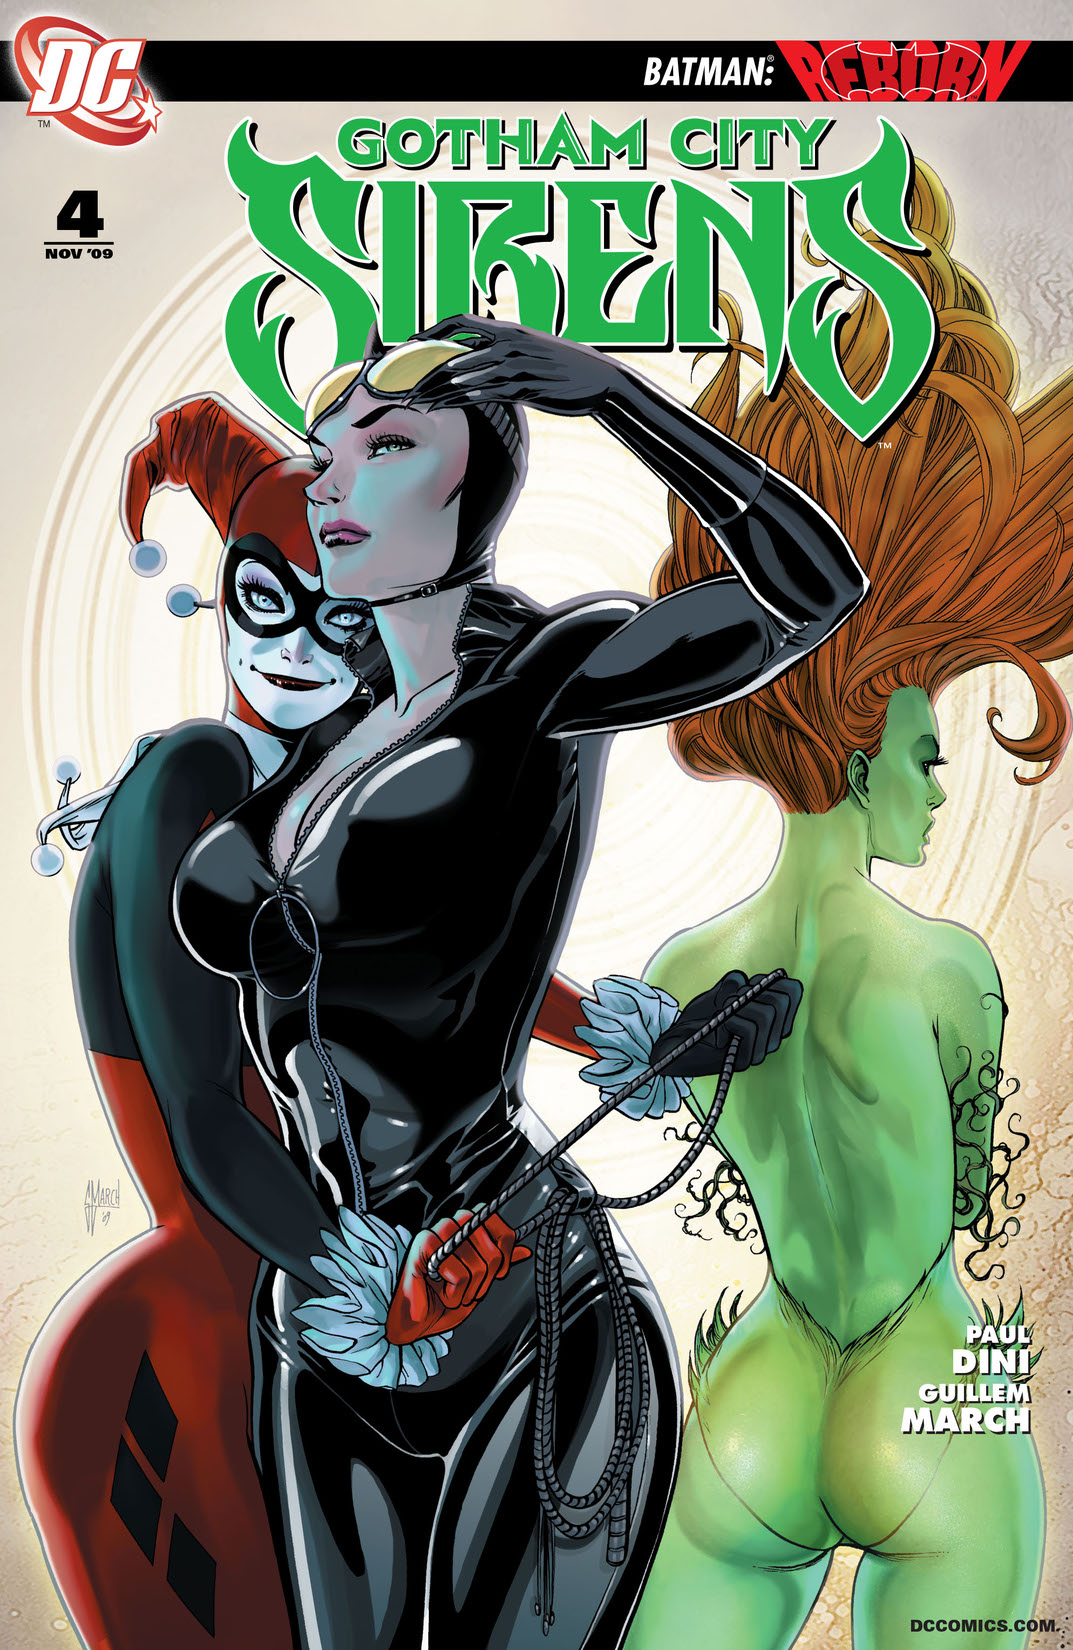 Gotham City Sirens #4 preview images